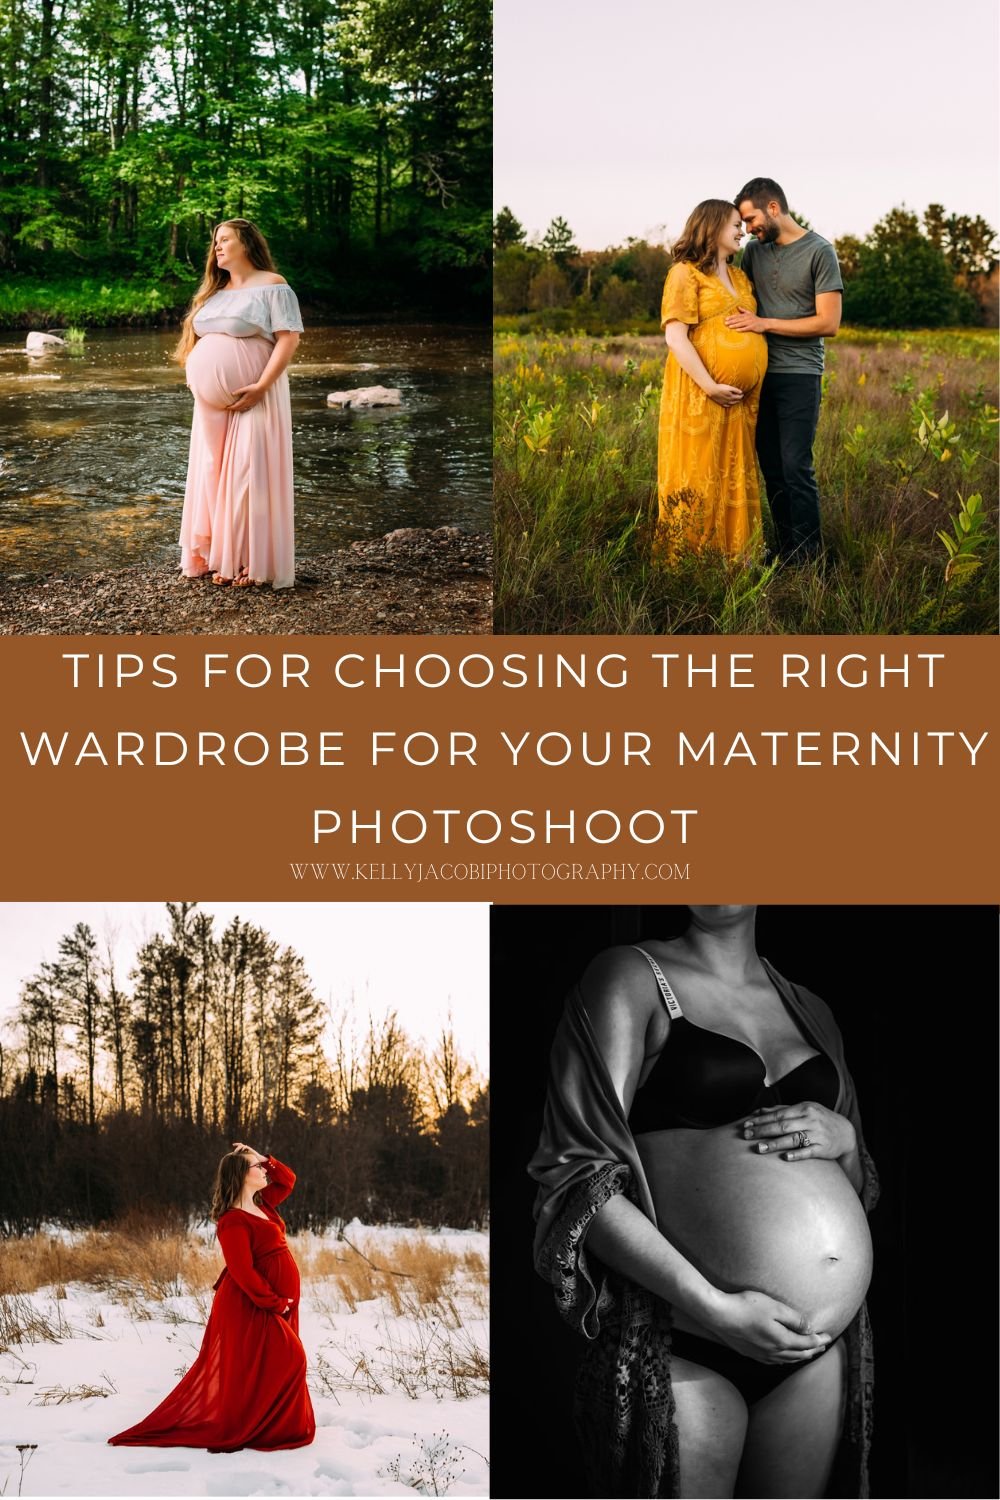 Tips for Choosing the Right Wardrobe for Your Maternity Photoshoot